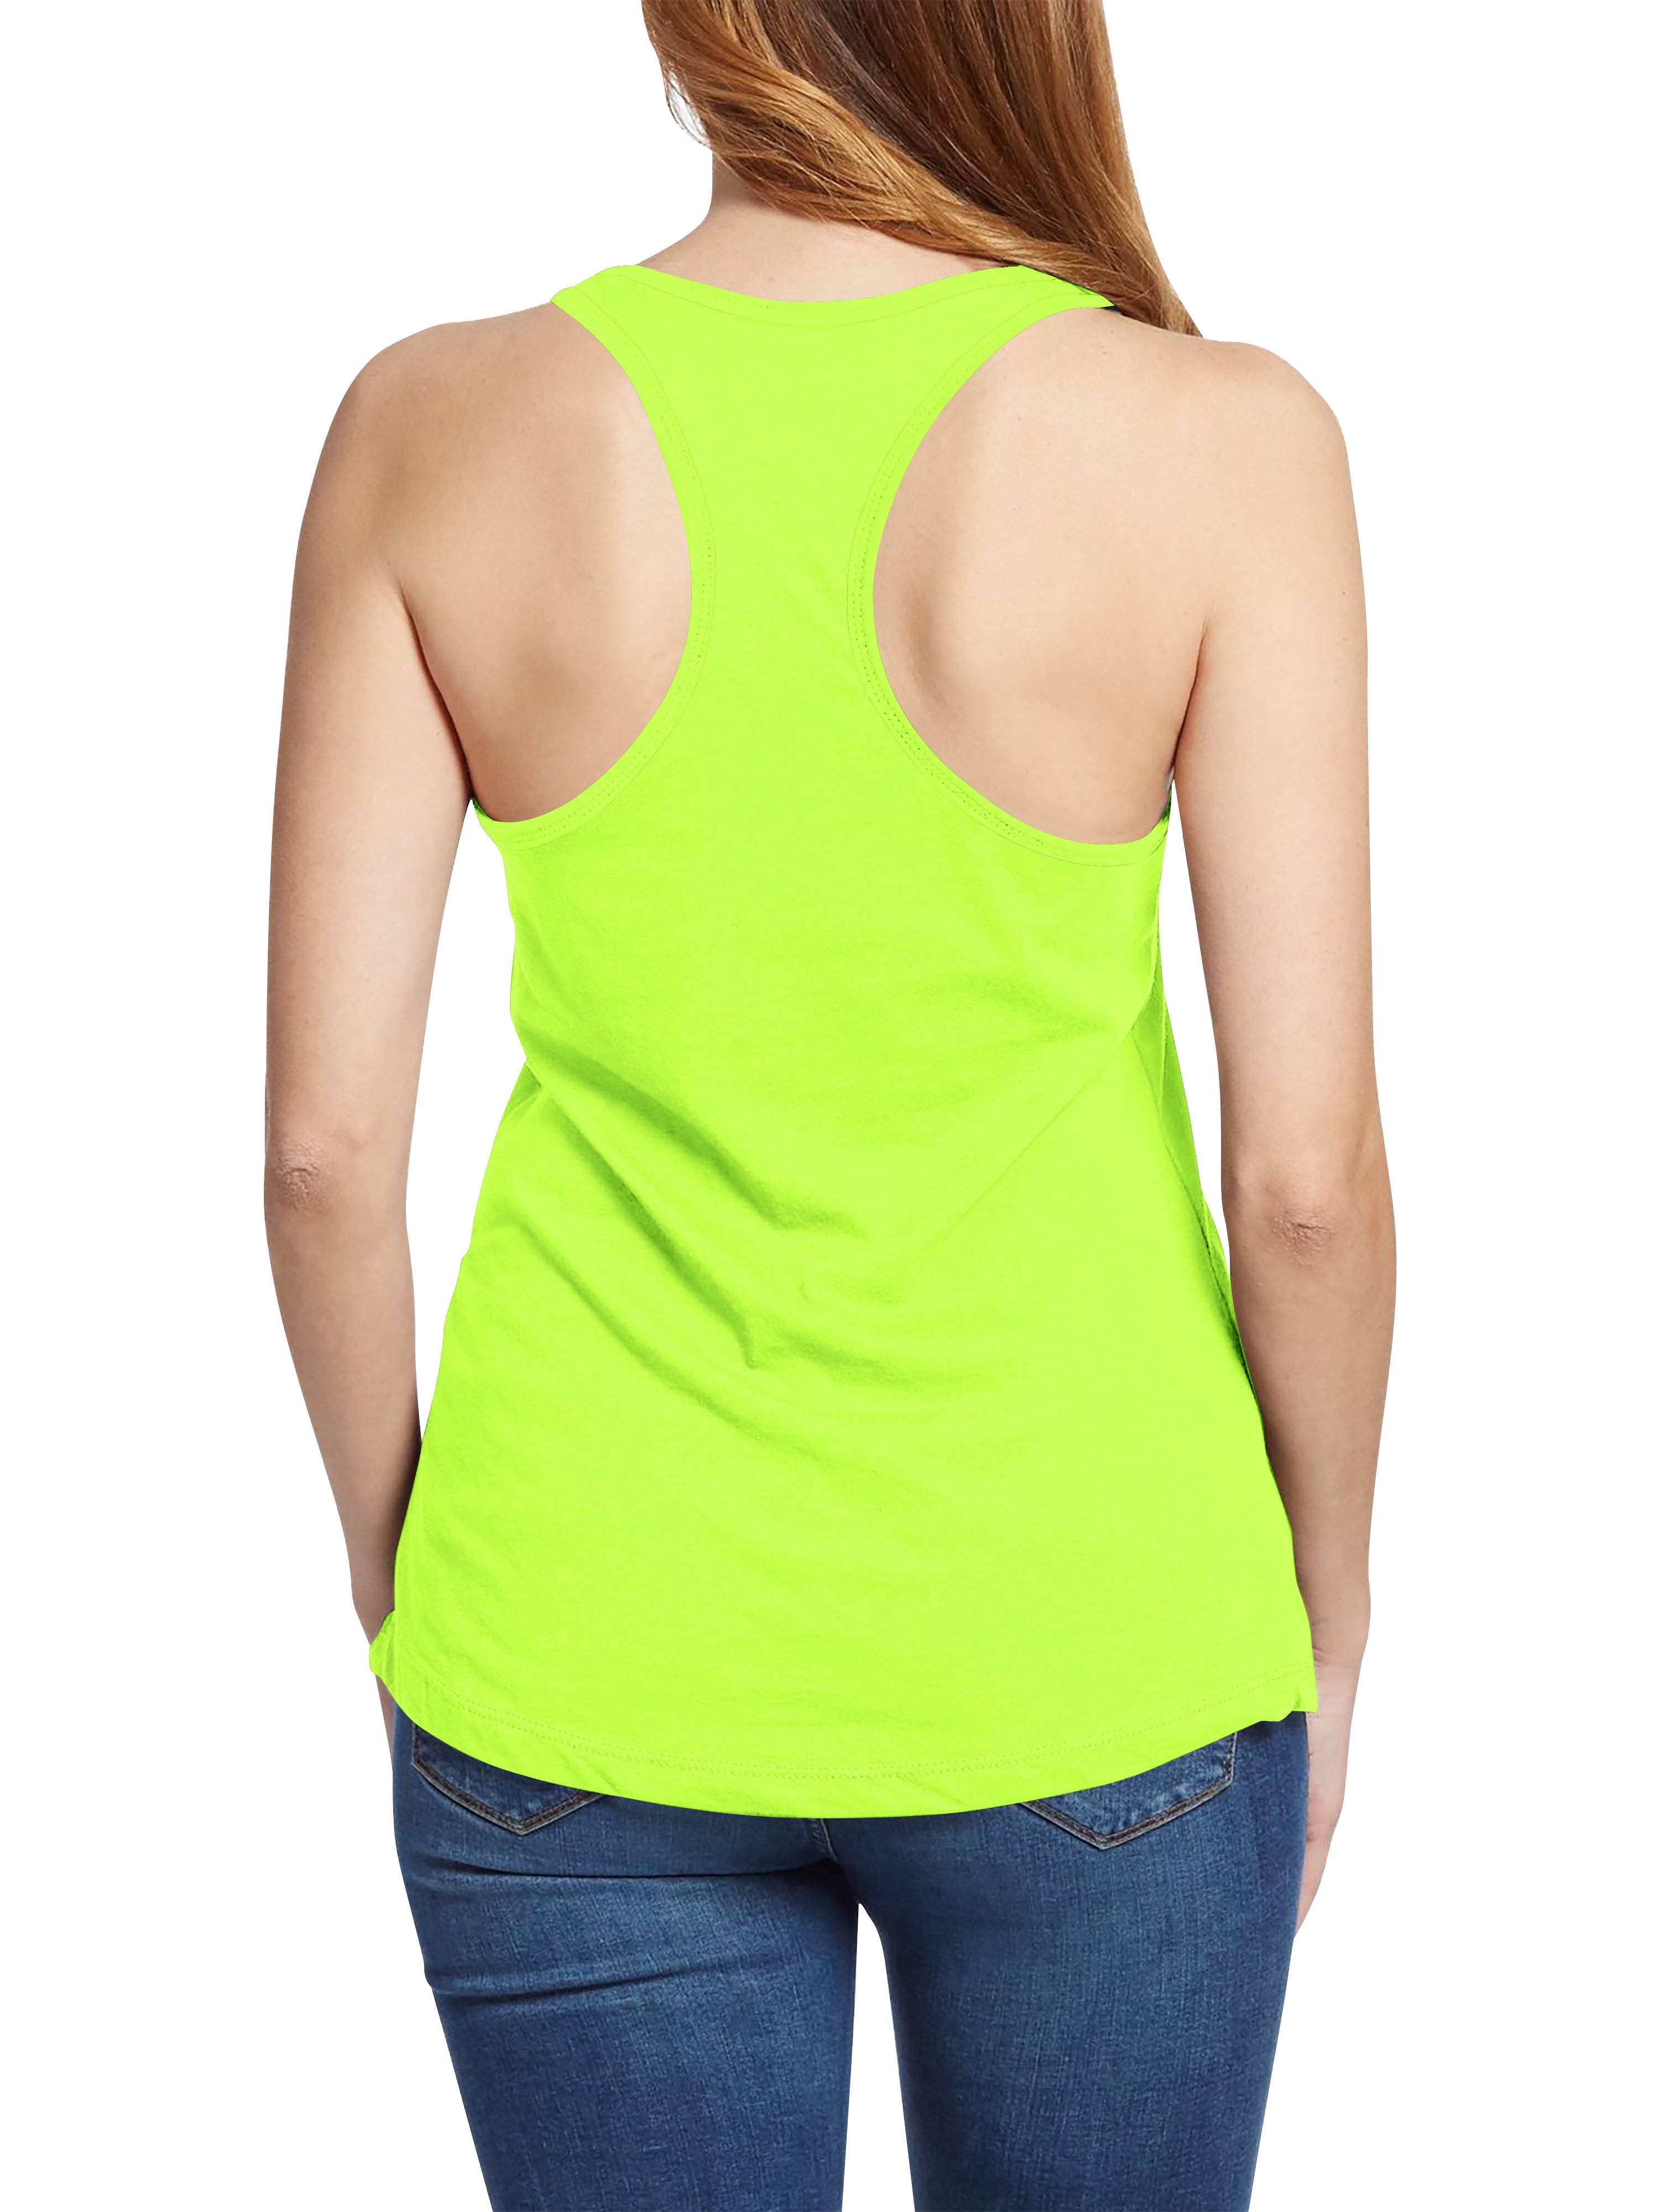 Women Clothing Only Women Tops Only Women Tank Tops Only Women green Tank Tops Only Women Tank Top ONLY 36 S, T1 